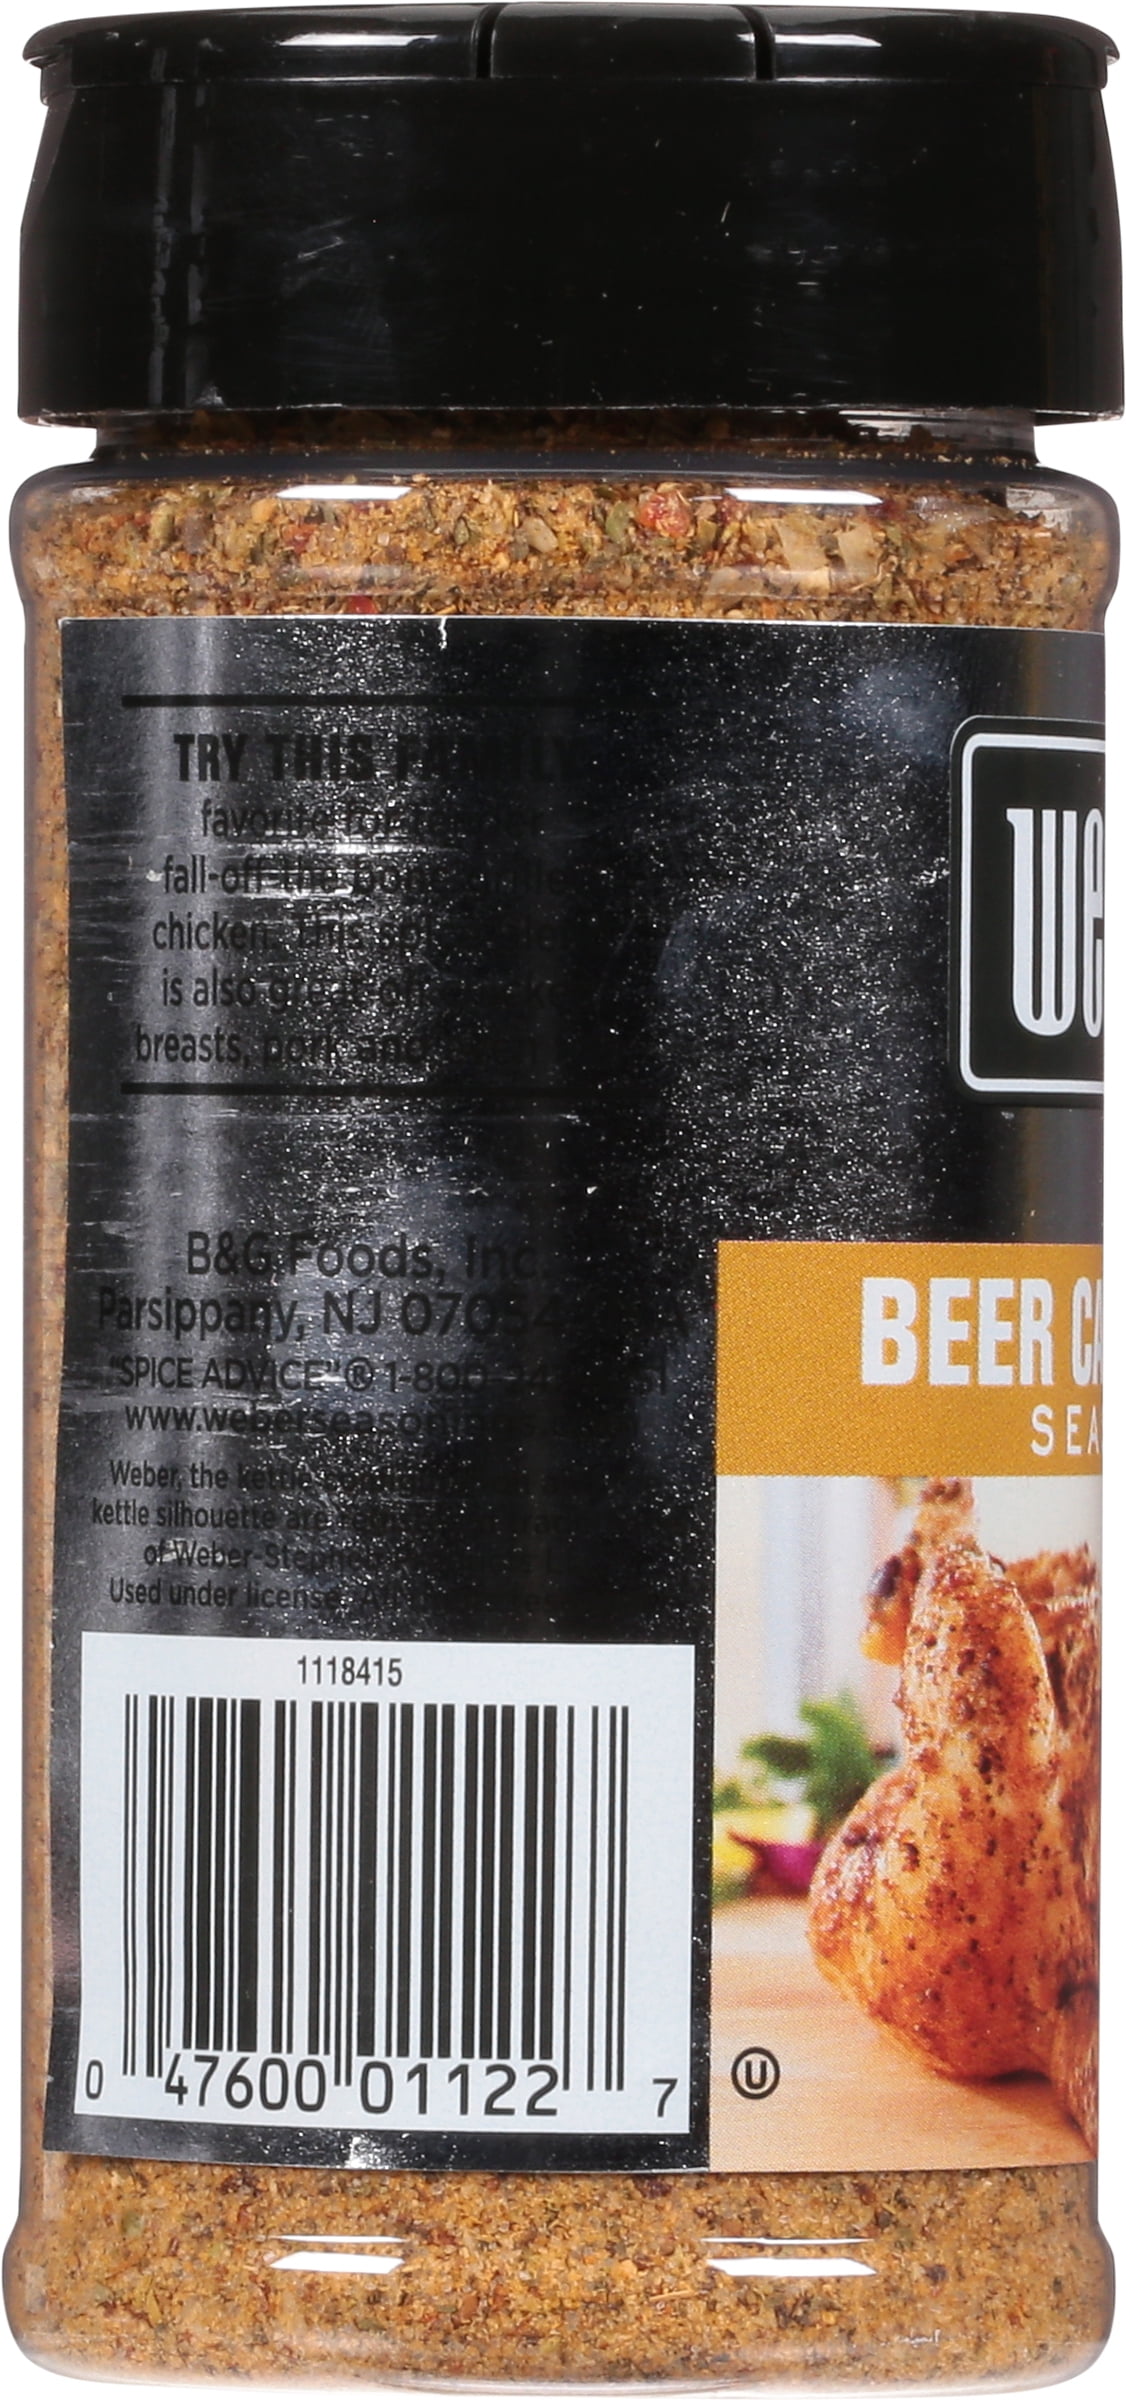 Weber Beer Can Chicken Seasoning - Shop Spice Mixes at H-E-B